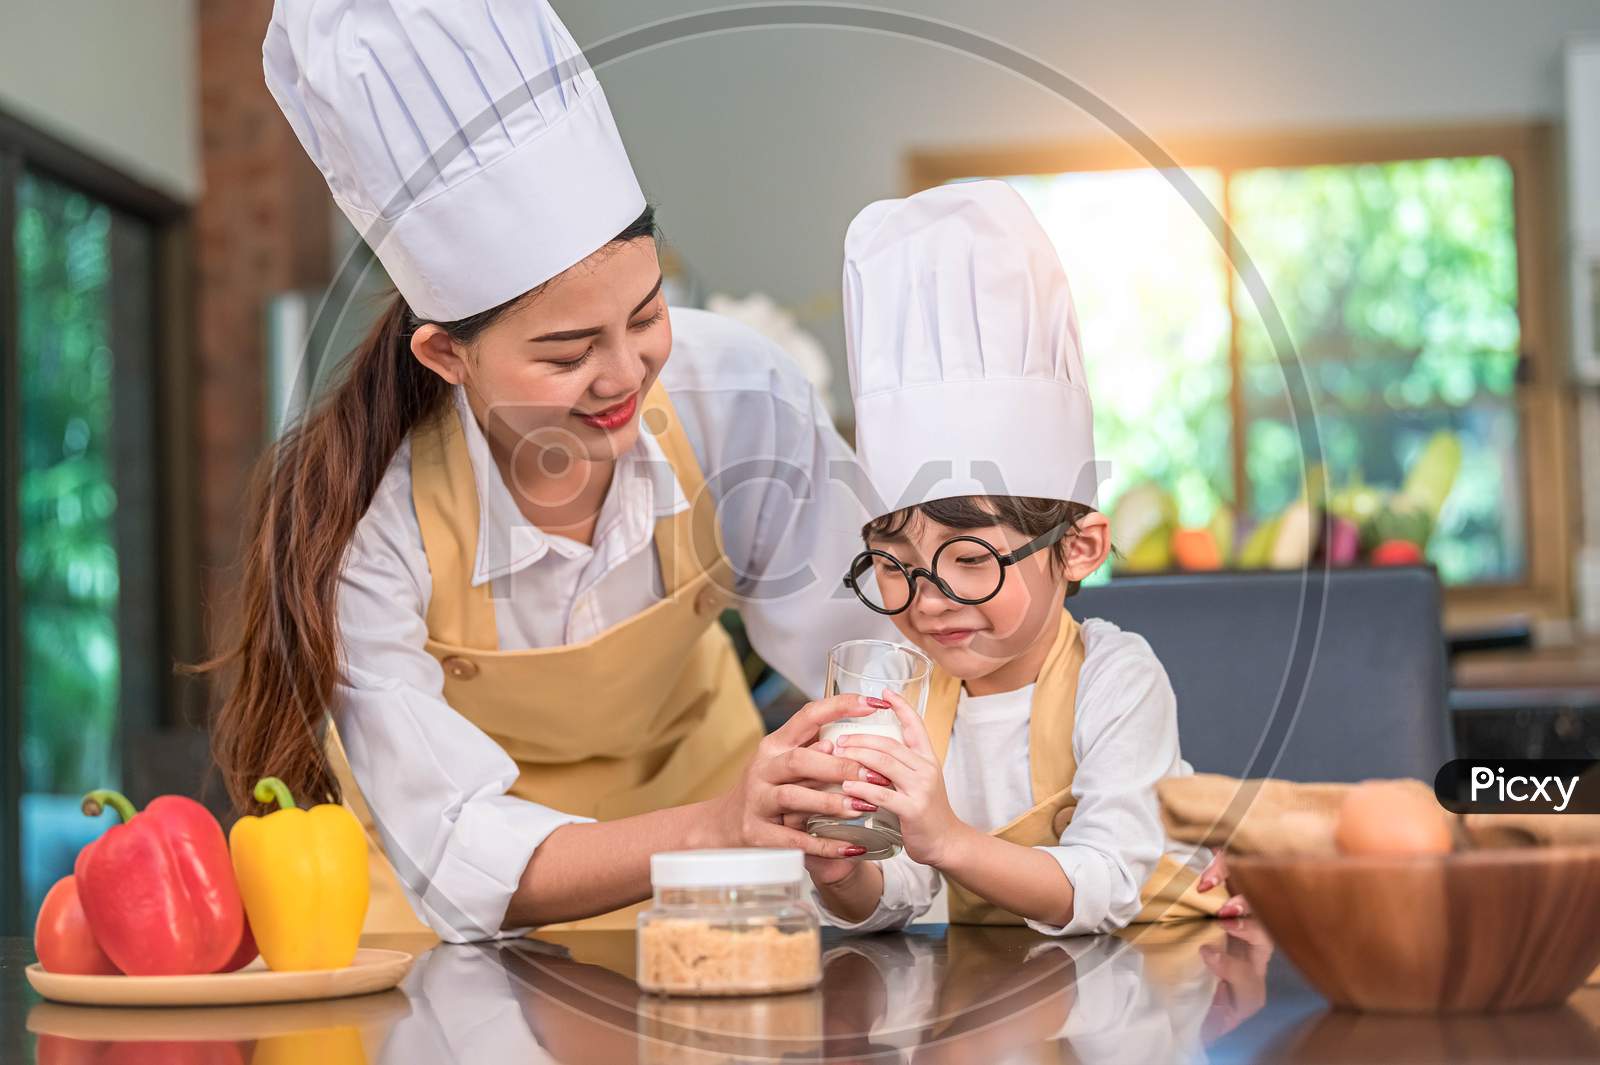 Beautiful Asian Woman Teaching Cute Little Boy With Eyeglasses To Drink Milk In Kitchen At Home Together. Lifestyles And Family. Son Dislike Milk And Doing Funny Face With Milk Glass. Food And Drink